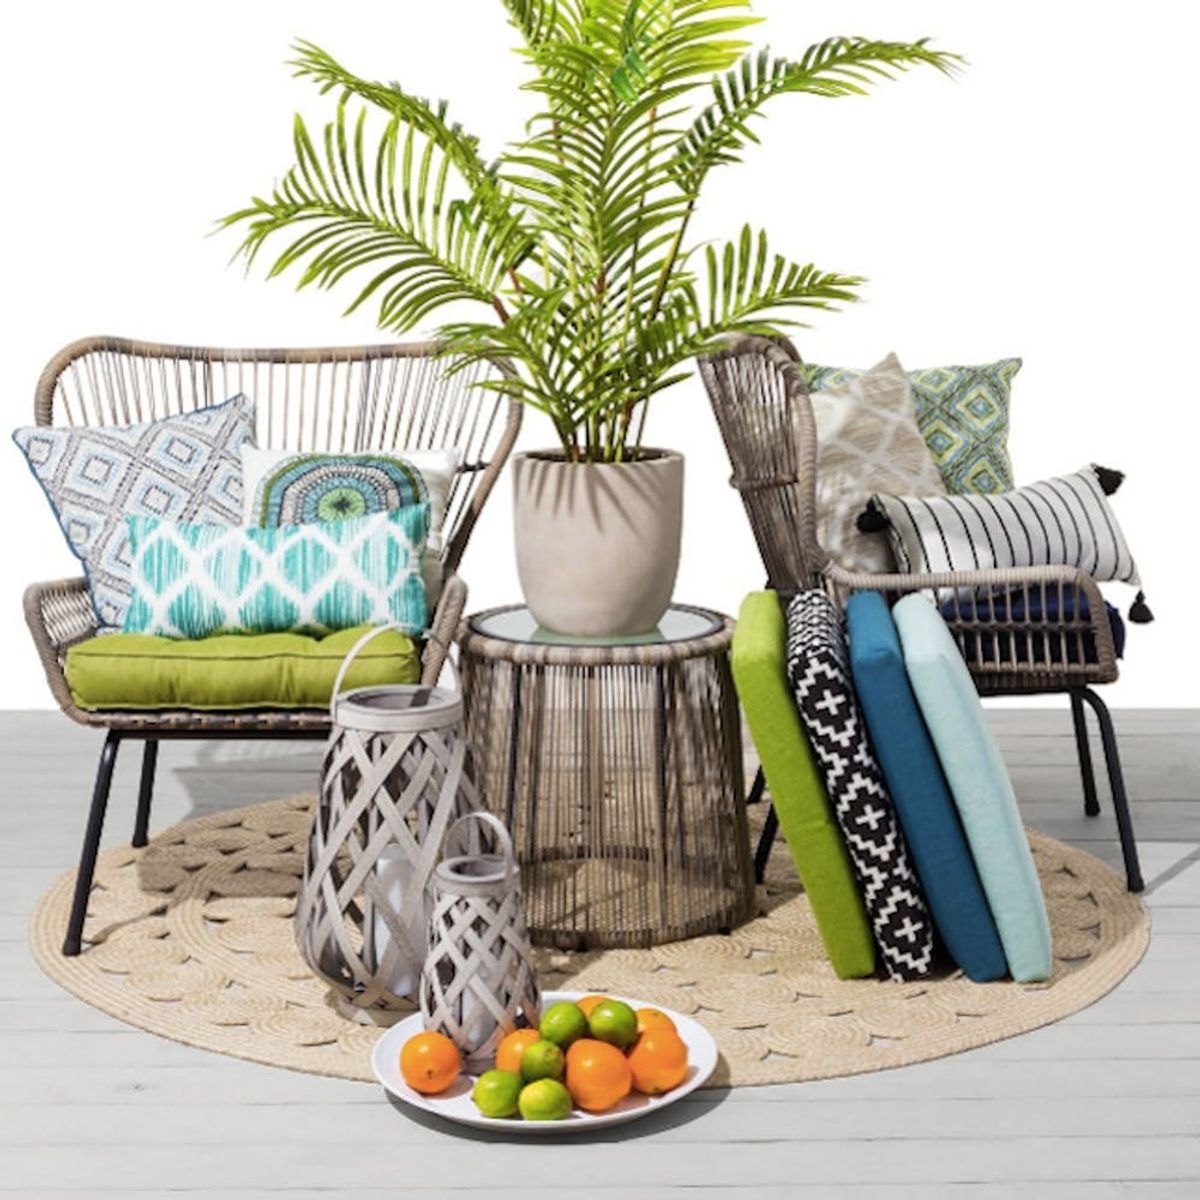 20 Outdoor Rugs That Will Instantly Spruce Up *Any* Patio